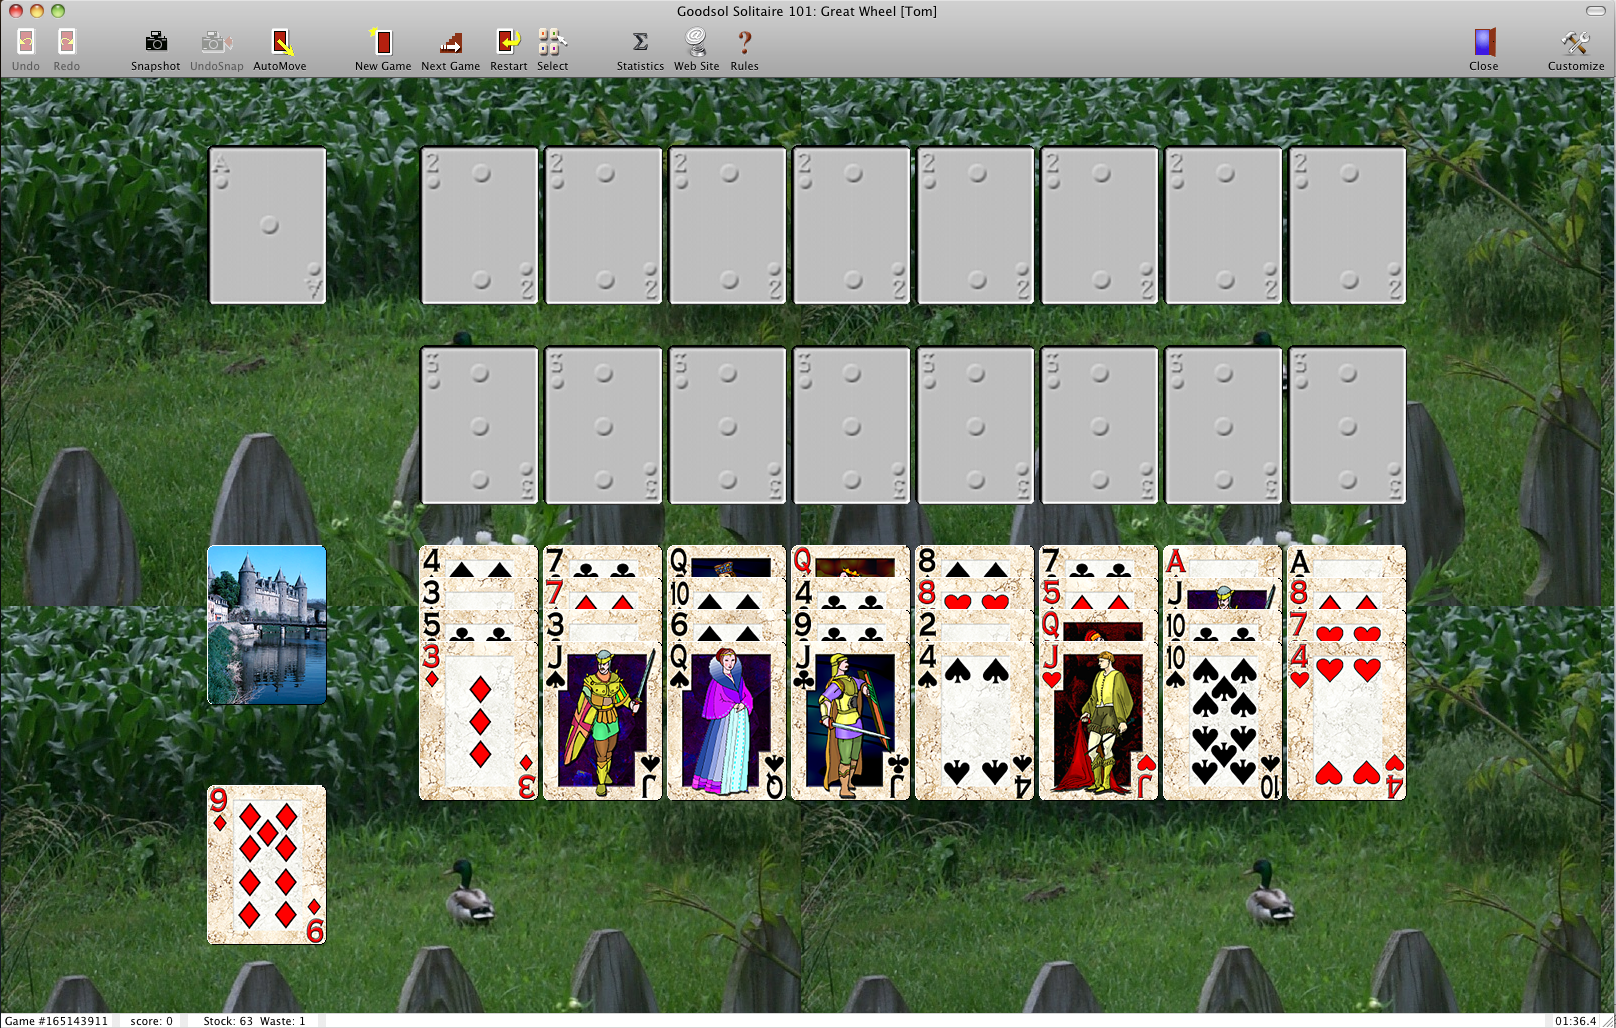 Goodsol Solitaire 101 101 of the Most Played Solitaire